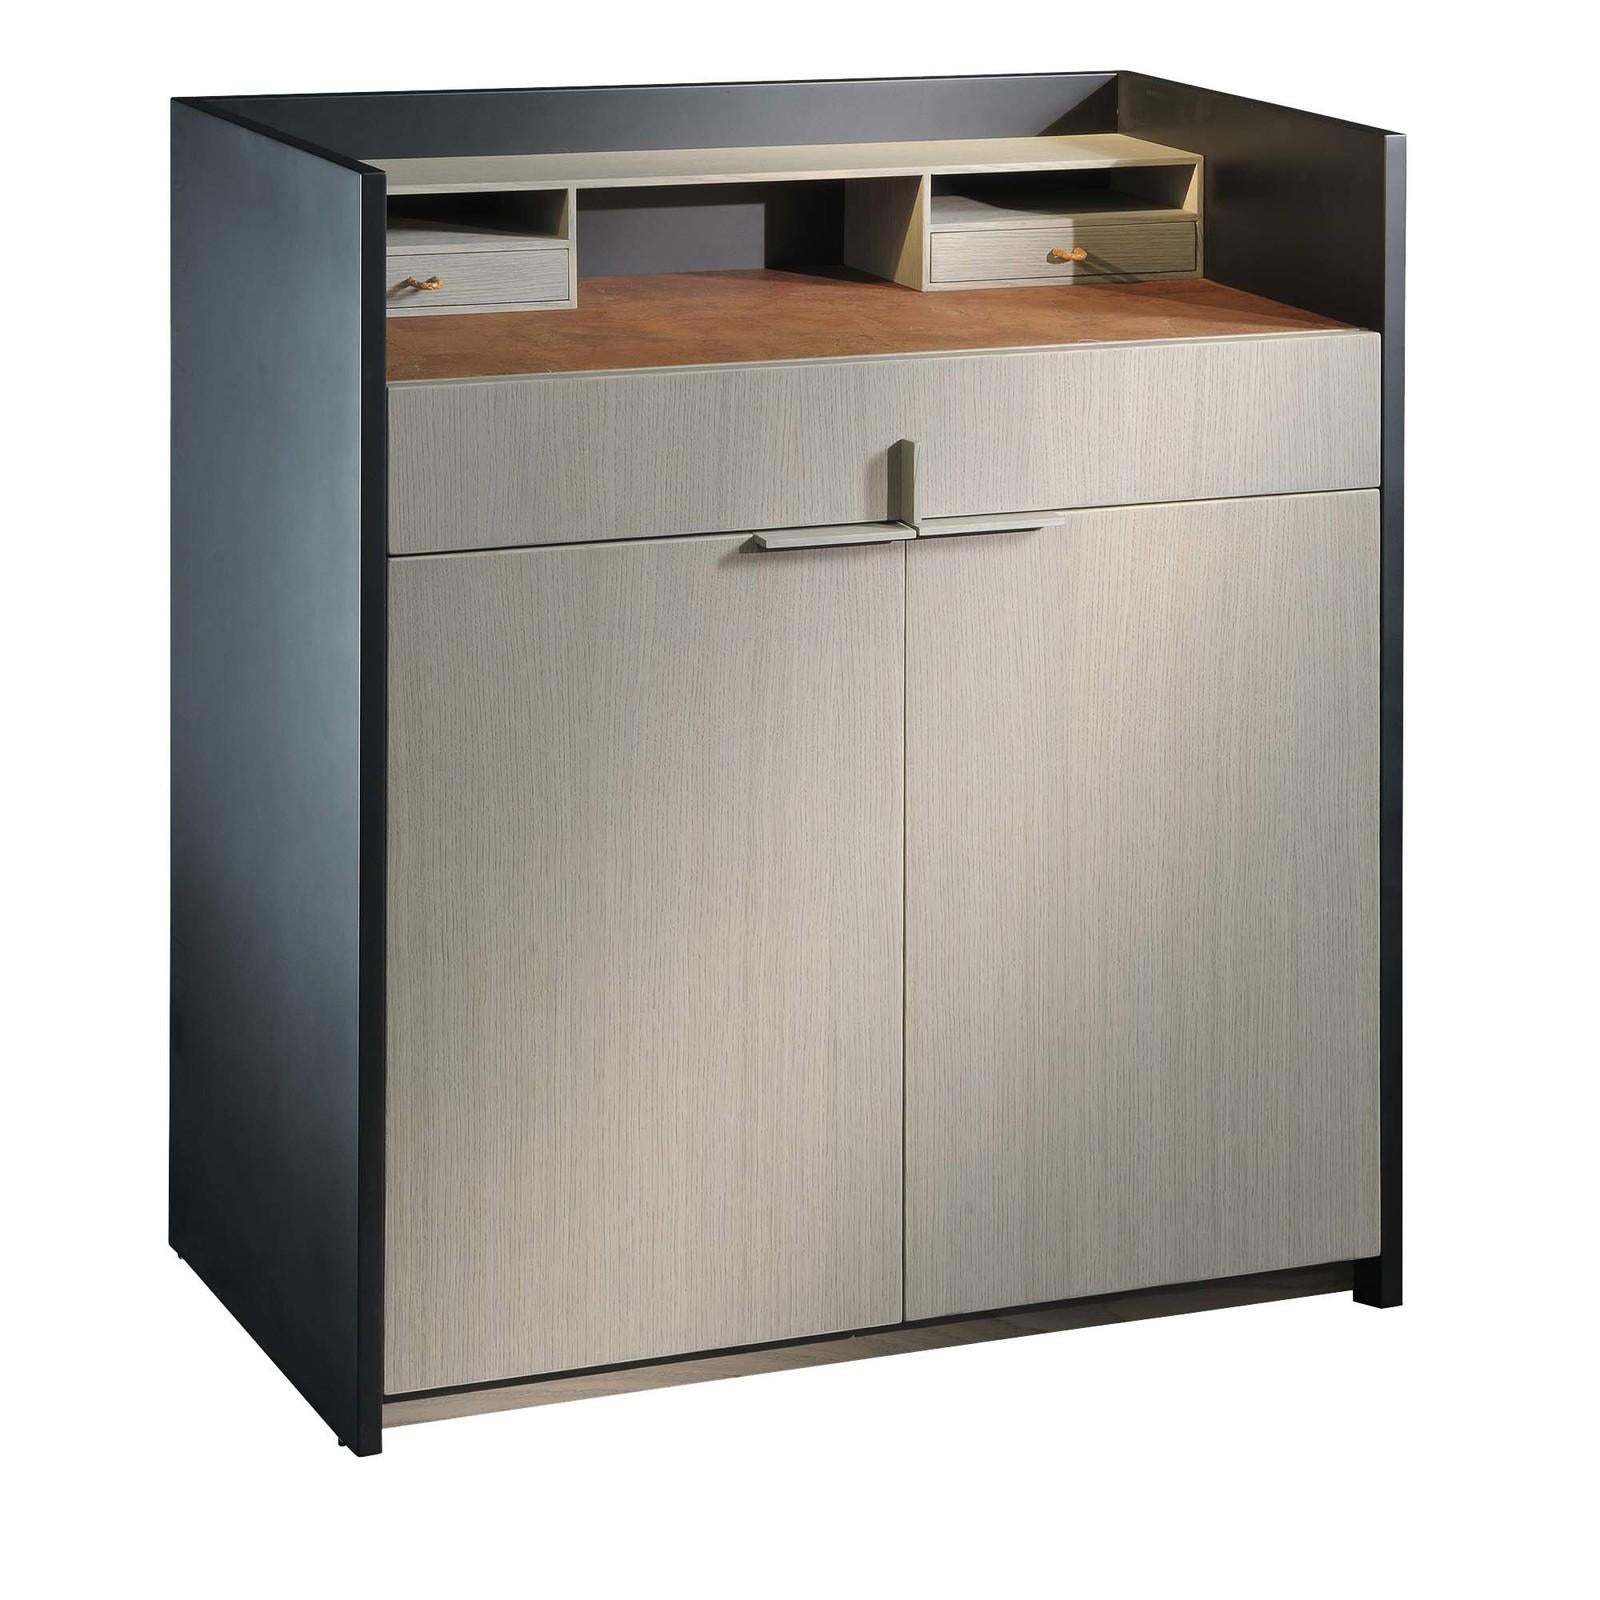 The elegant aesthetic of this cabinet is linear and pure, made of stained oak, black for the external frame and beige for the central unit, featuring two doors and a top drawer. Formal simplicity and sophisticated finishes give this piece a strong